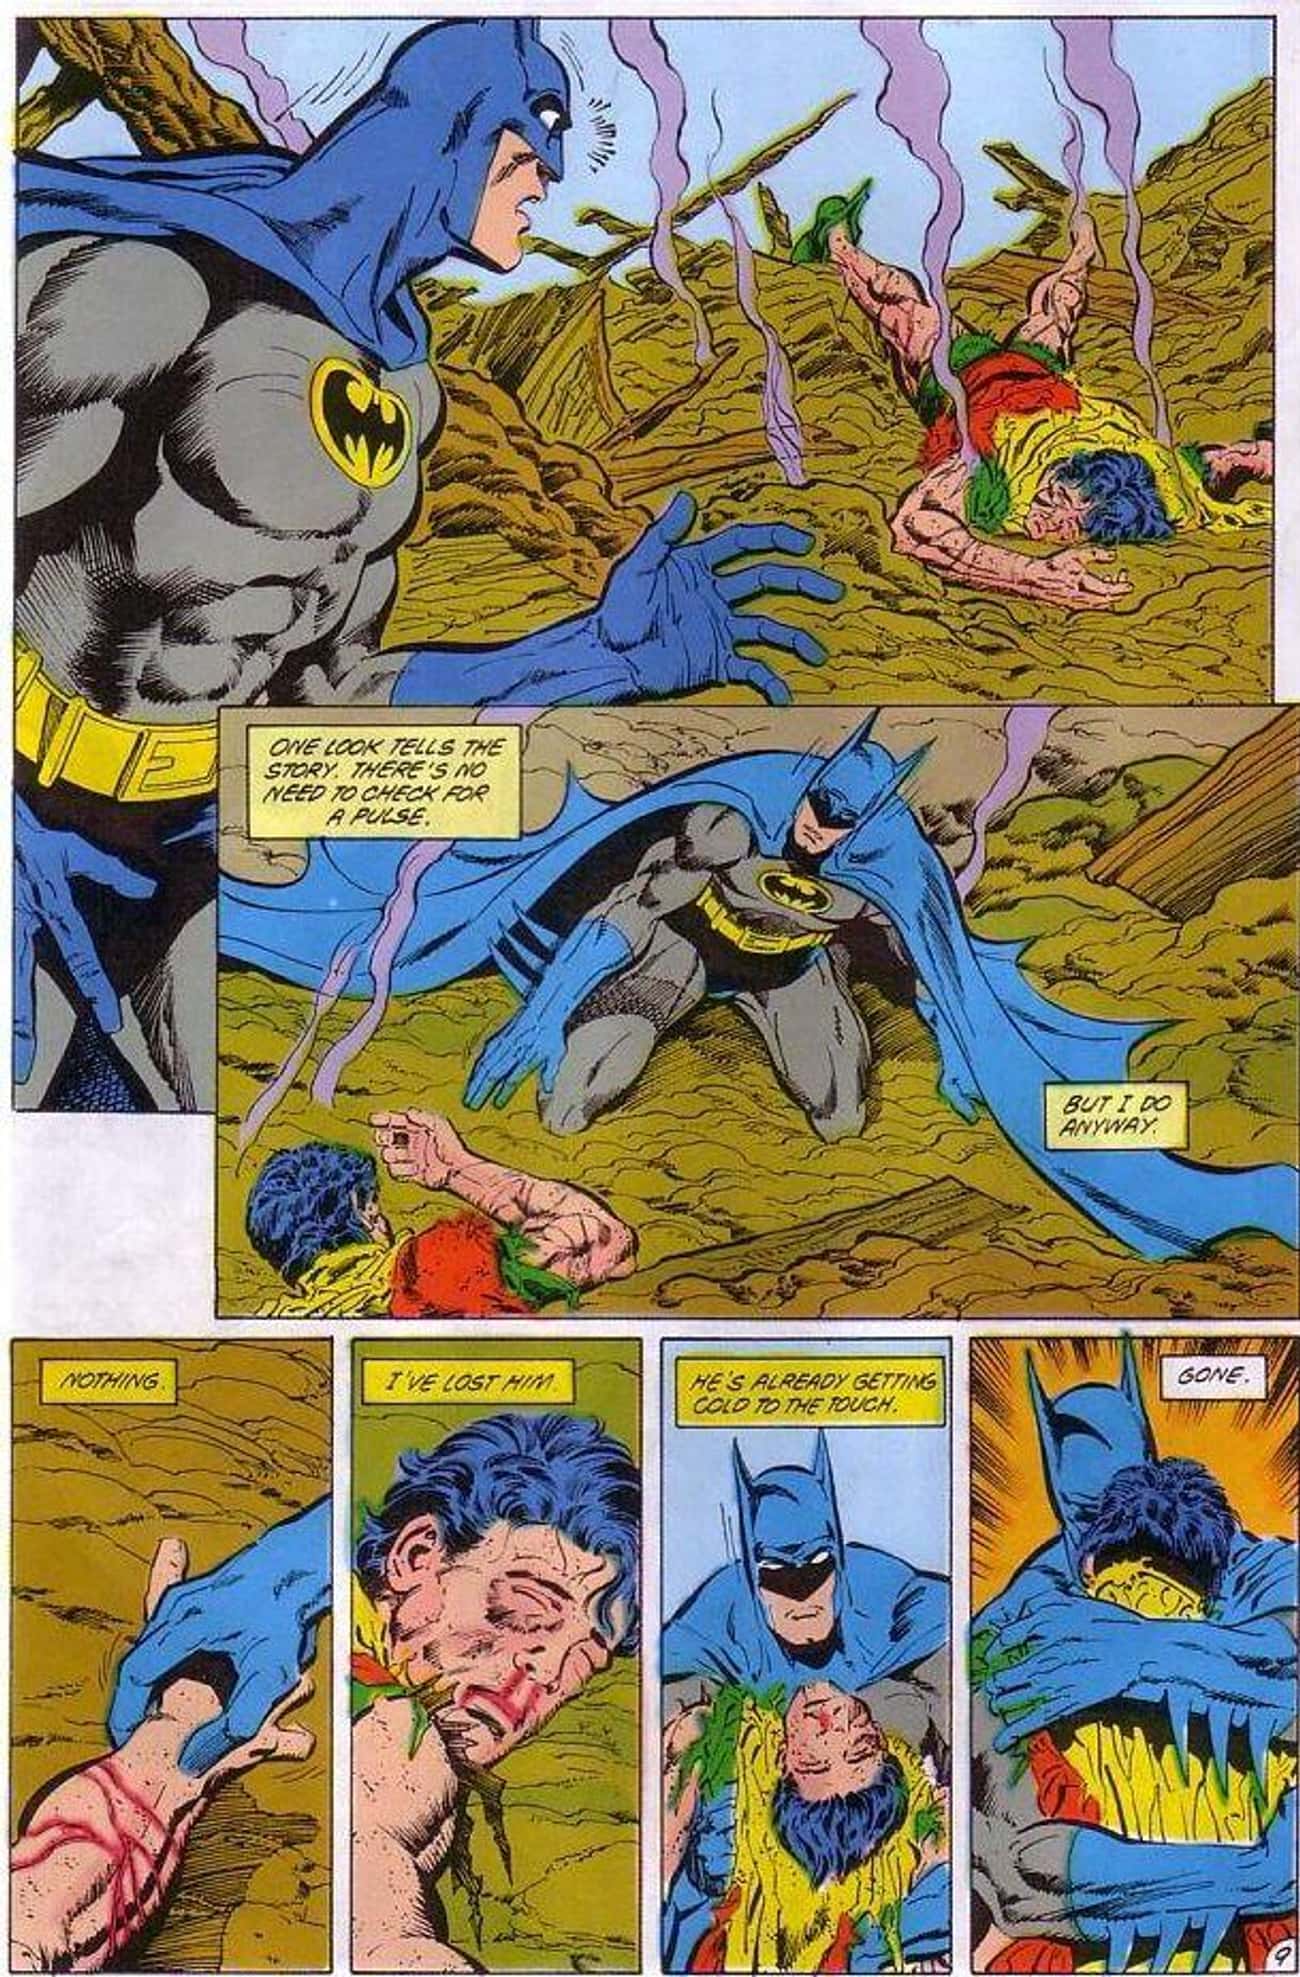 The Death and Return of Jason Todd